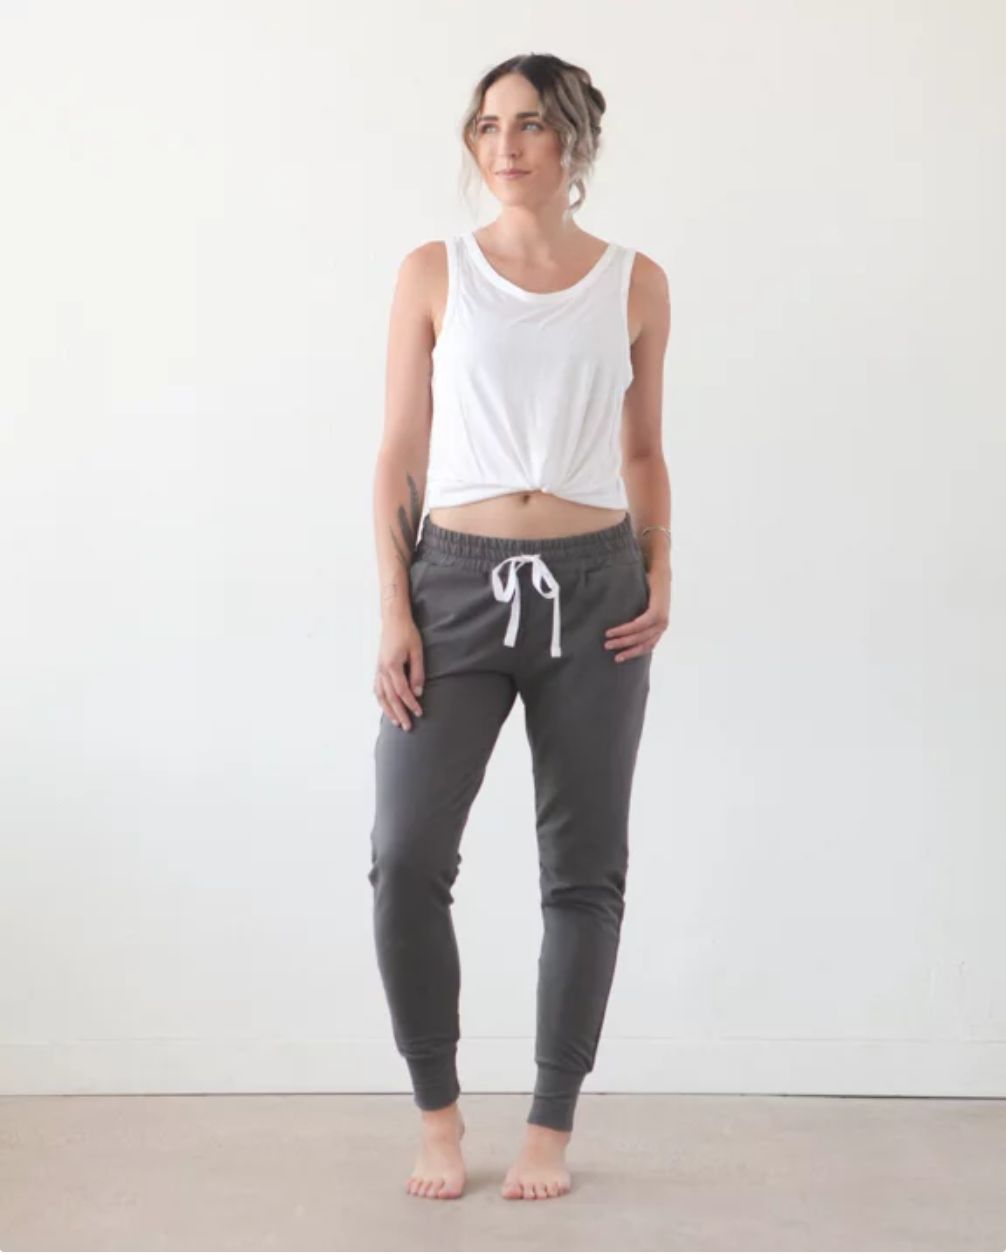 Woman wearing the Hudson Pant sewing pattern by True Bias. A jogger sweatpant pattern made in cotton lycra, French terry, ponte or sweatshirt knit fabric featuring an urban fit with extra room around the hips and then tapers into a skinny leg, elastic wai